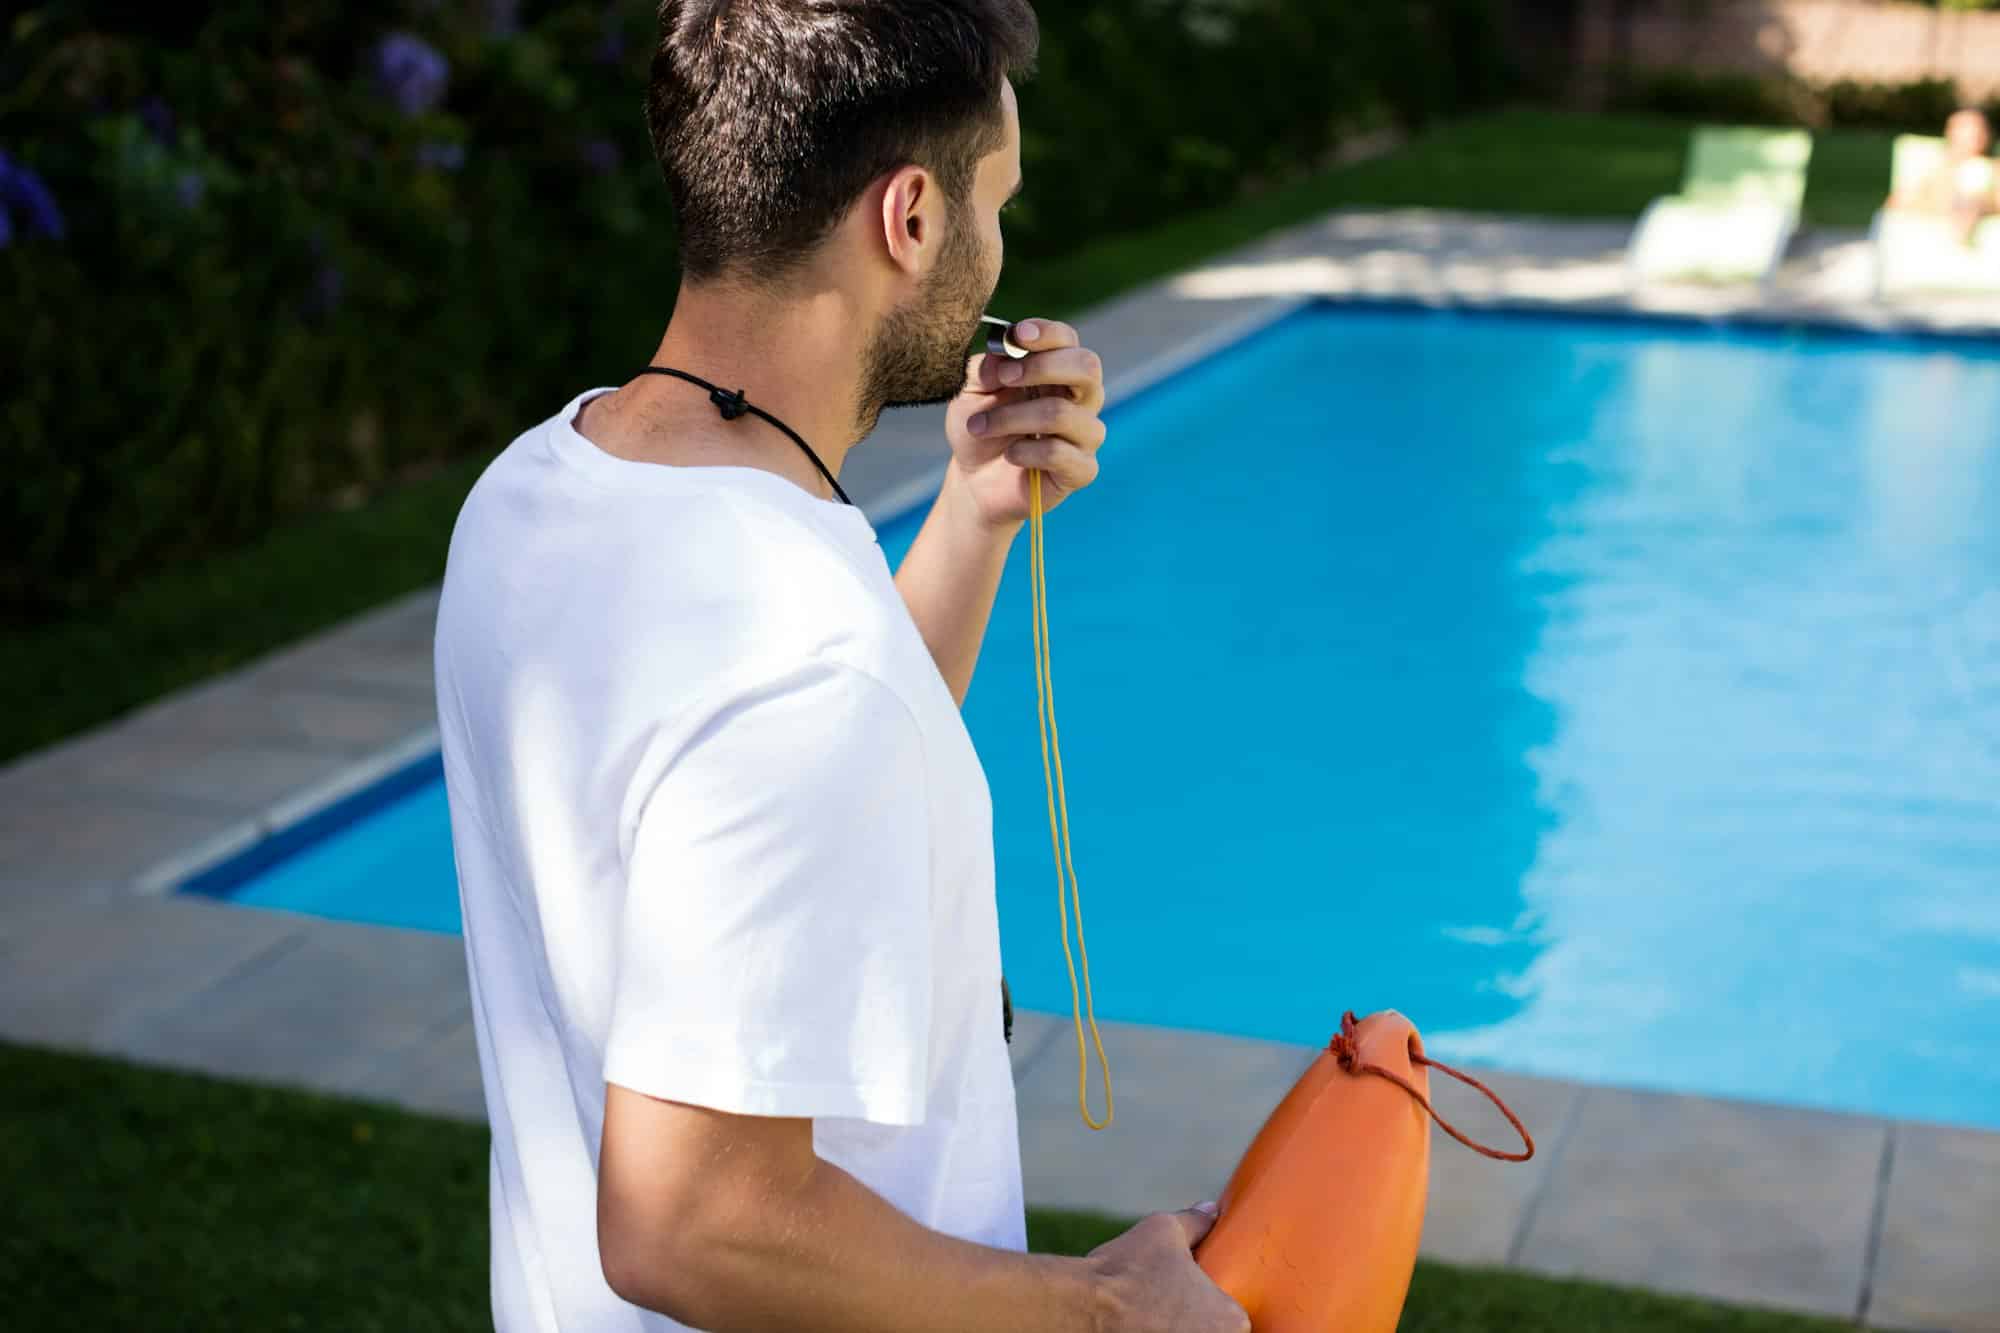 Lifeguard blowing whistle at poolside